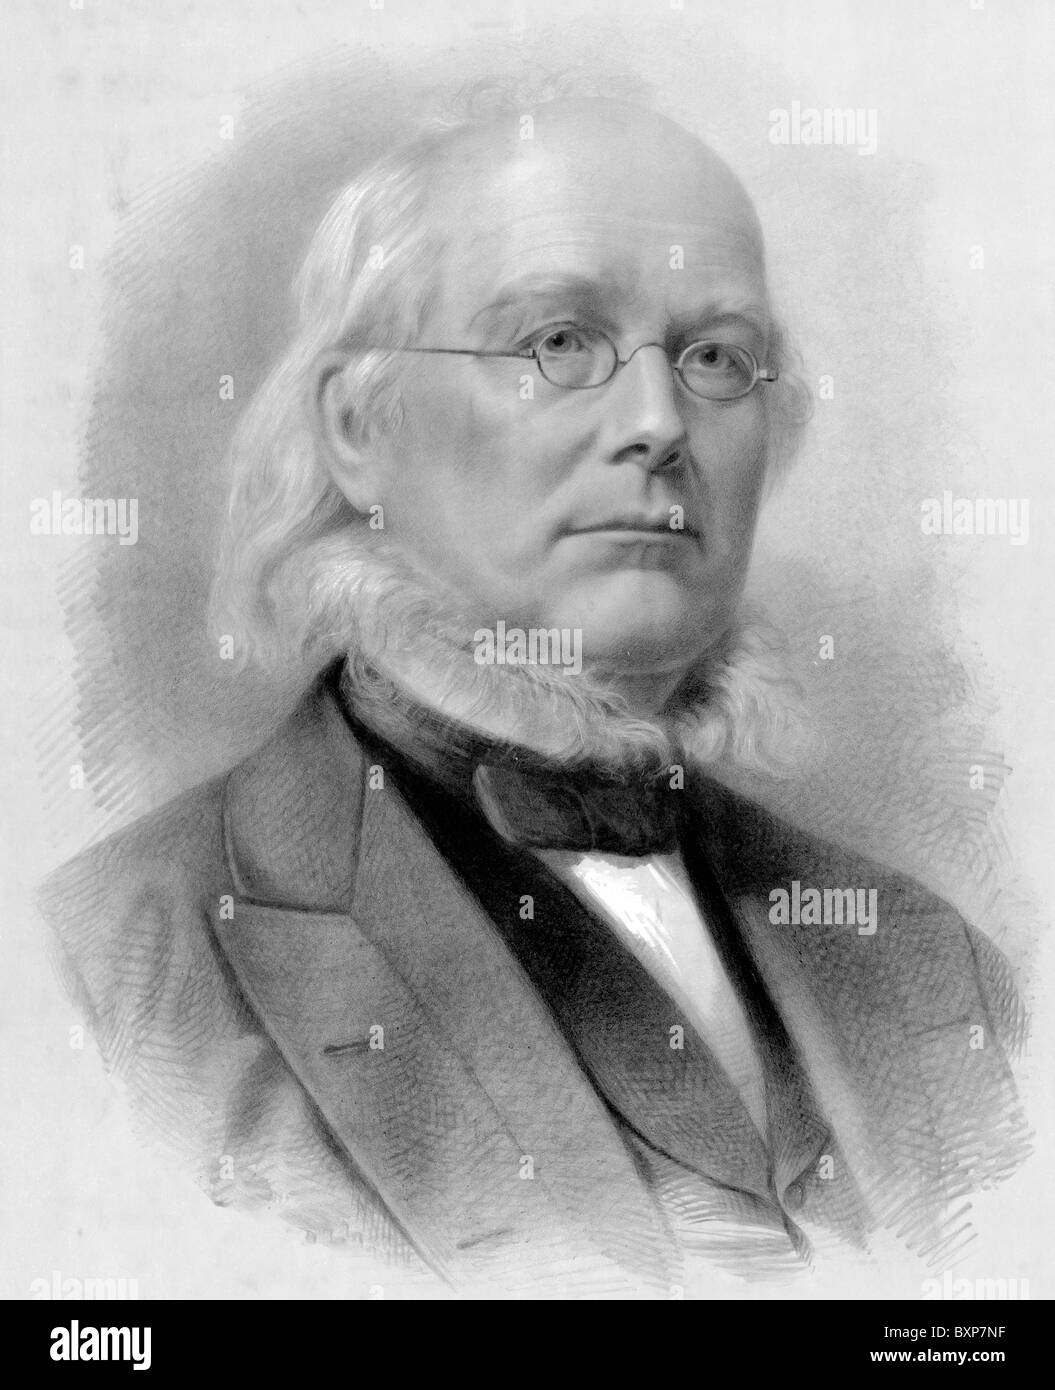 Horace Greeley  - American Newspaper Editor, Founder of the Liberal Republican Party and 1872 Presidential Candidate c. 1872 Stock Photo